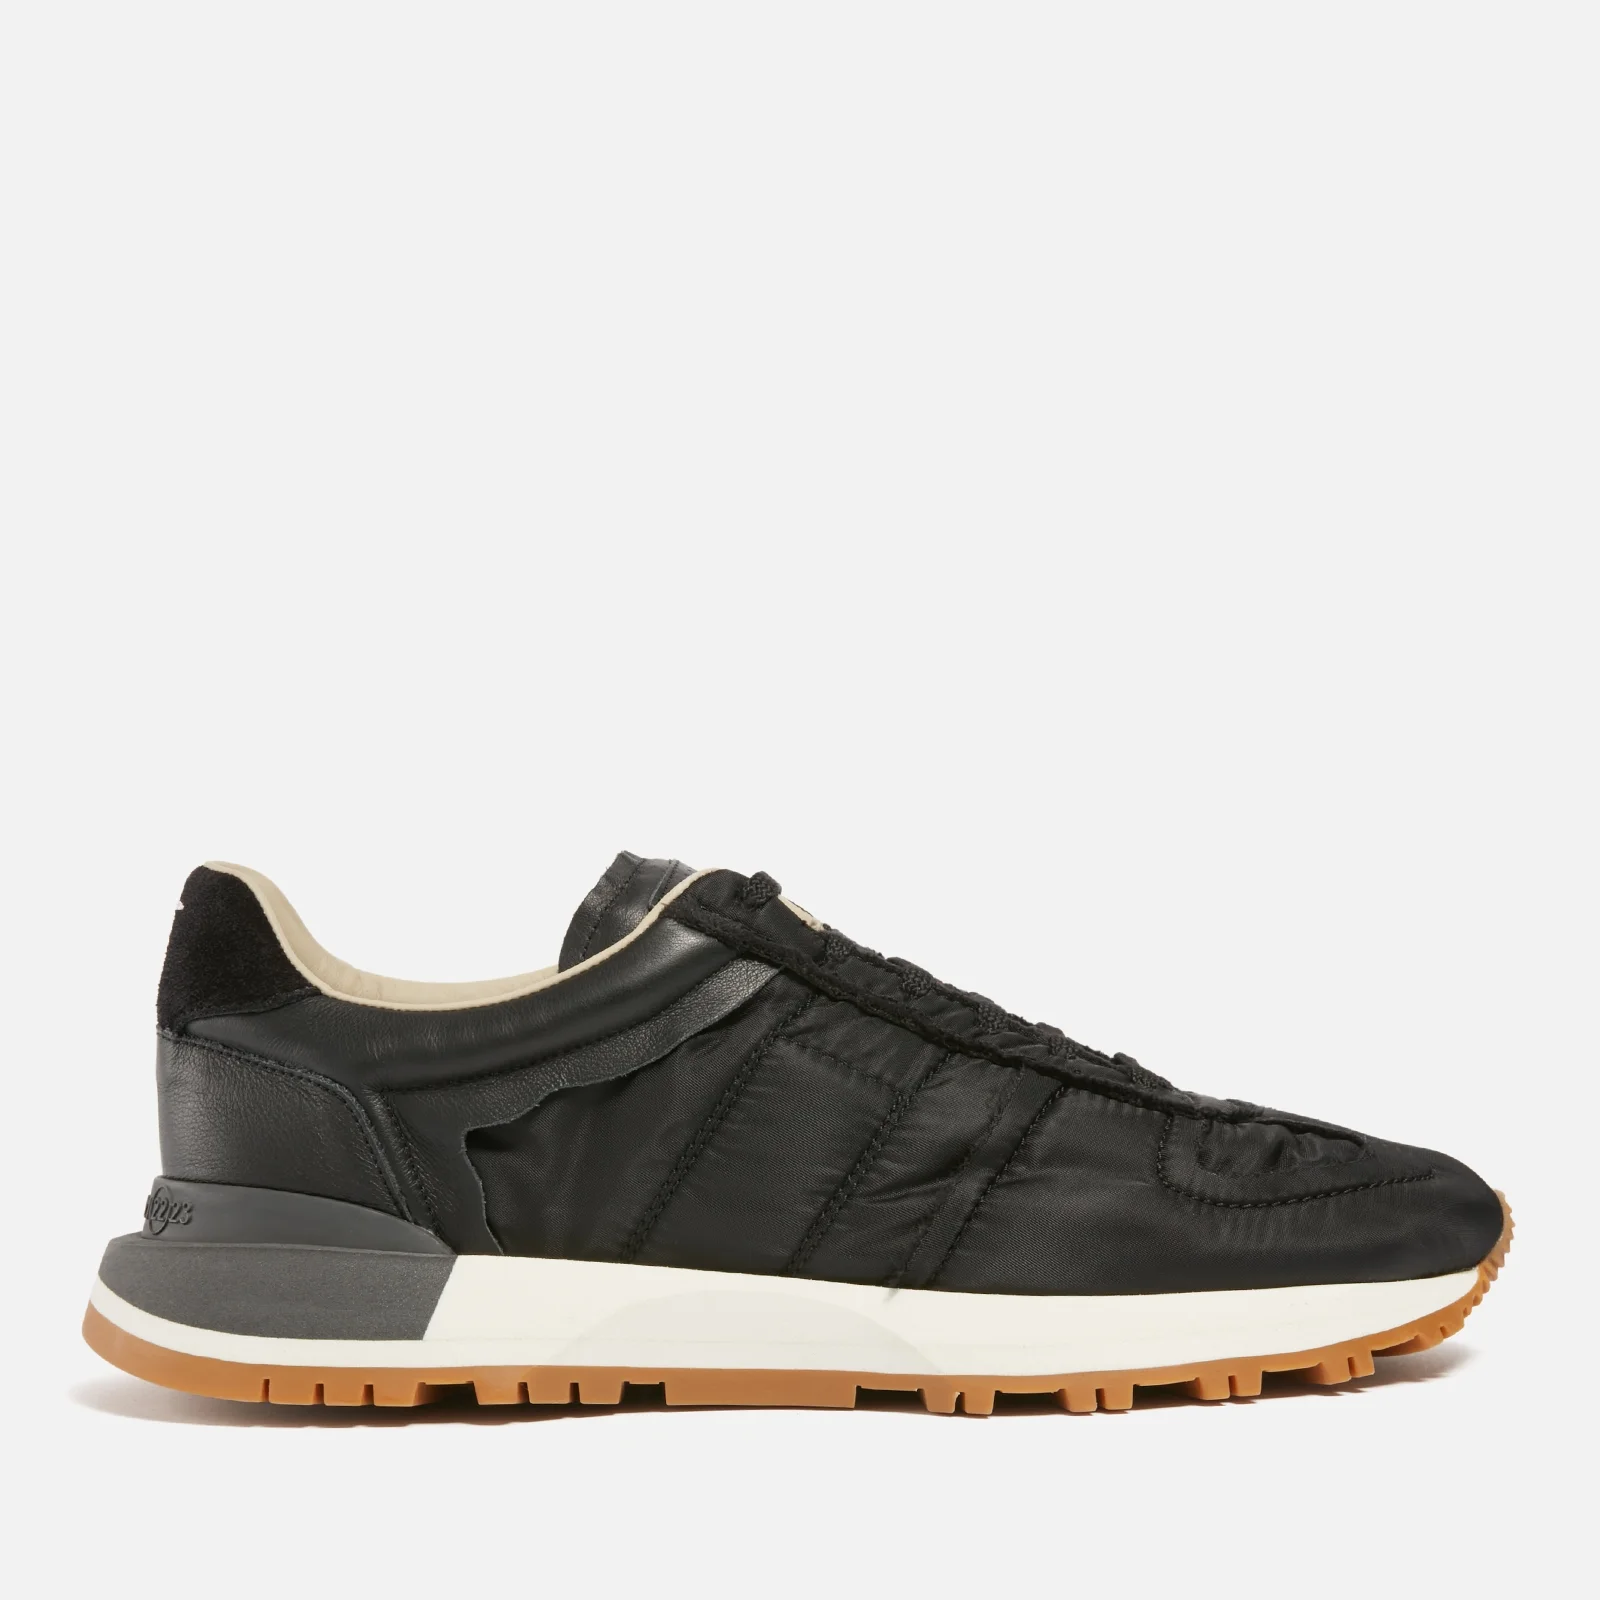 Maison Margiela Men's 5050 Nylon and Suede Runner Trainers Image 1